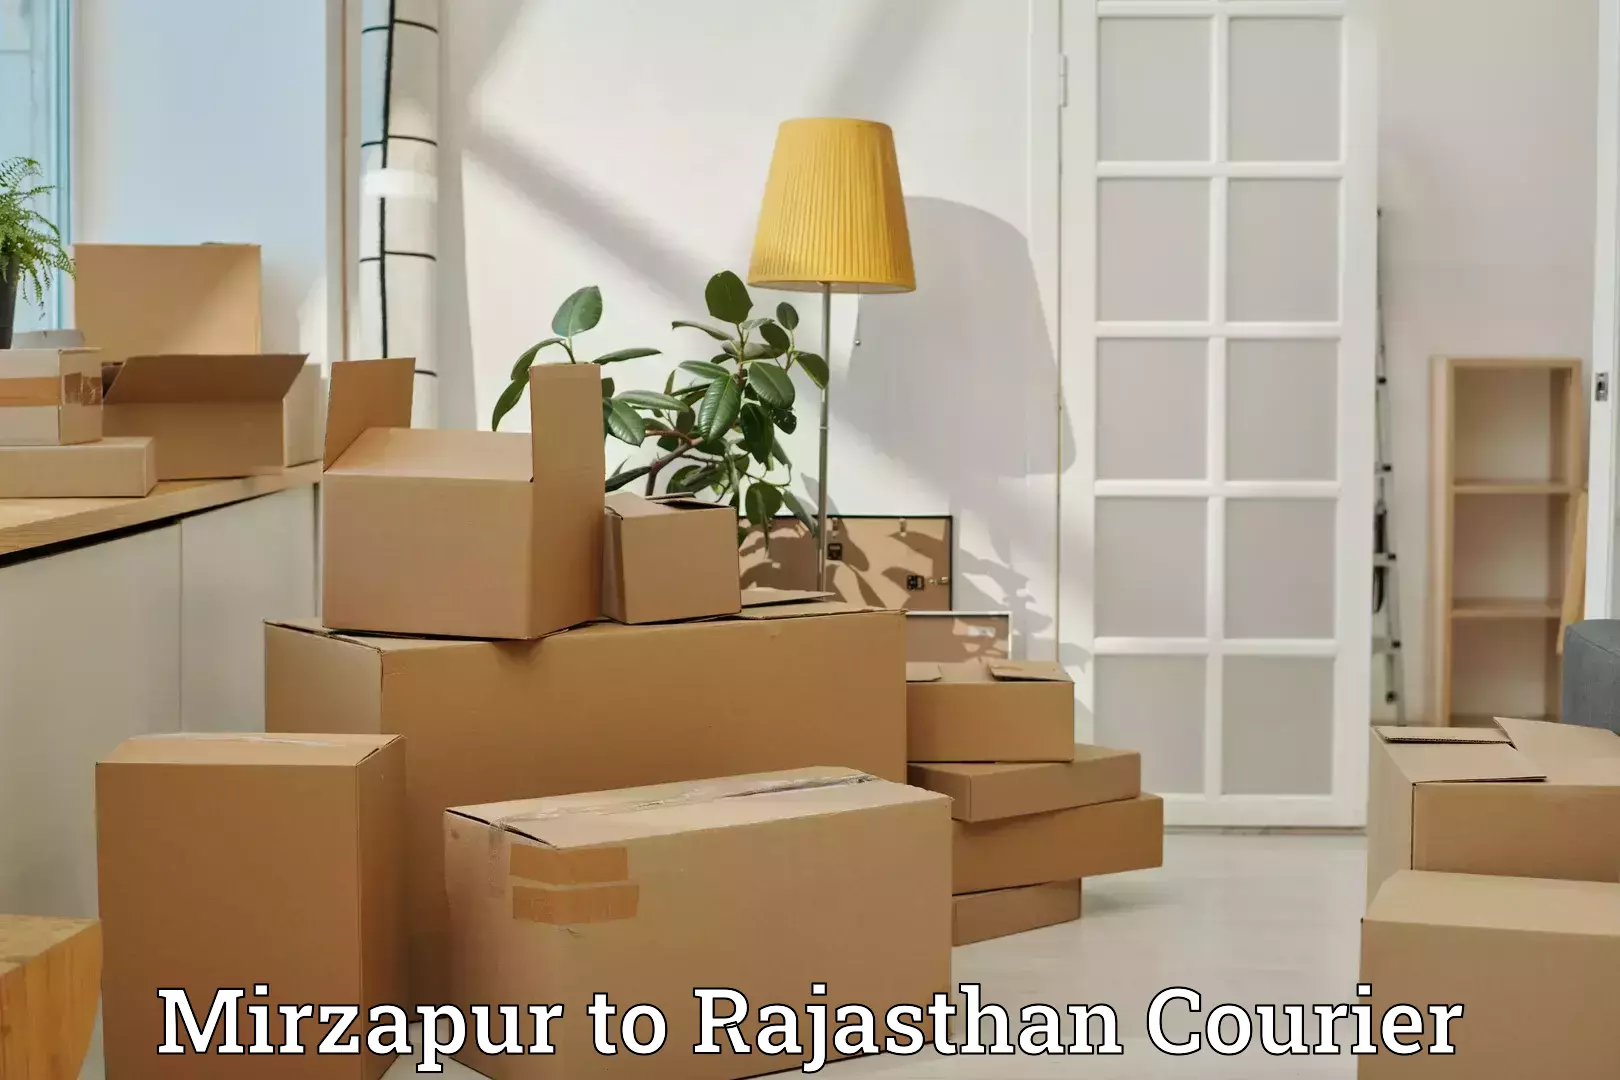 Luggage shipment specialists Mirzapur to Rajasthan